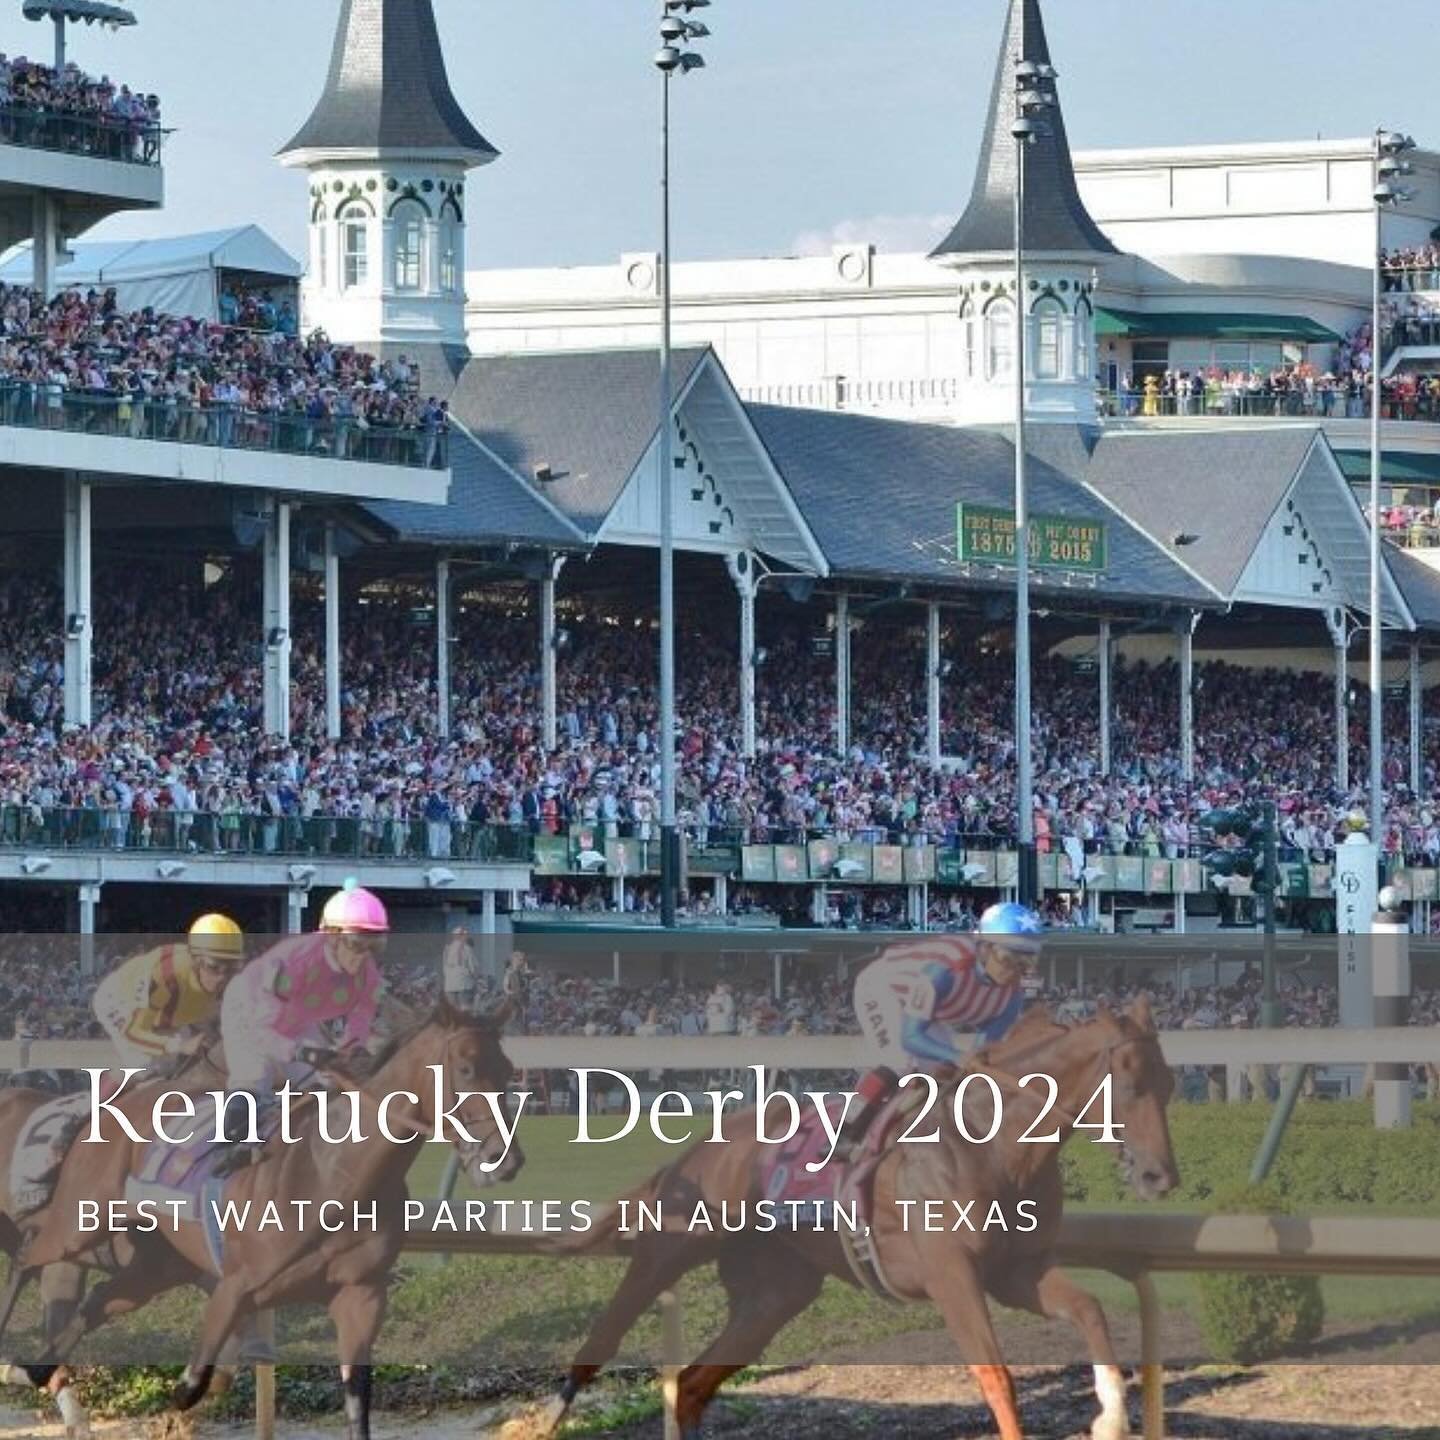 Kentucky Derby 2024 🐎 Have you figured out your plans this Saturday for the Kentucky Derby? Don&rsquo;t worry, I&rsquo;ve rounded up the best watch parties in Austin! 

Black Sheep Lodge
2108 S Lamar Blvd | 3 - 6 PM | Drink Specials &amp; Best Dress